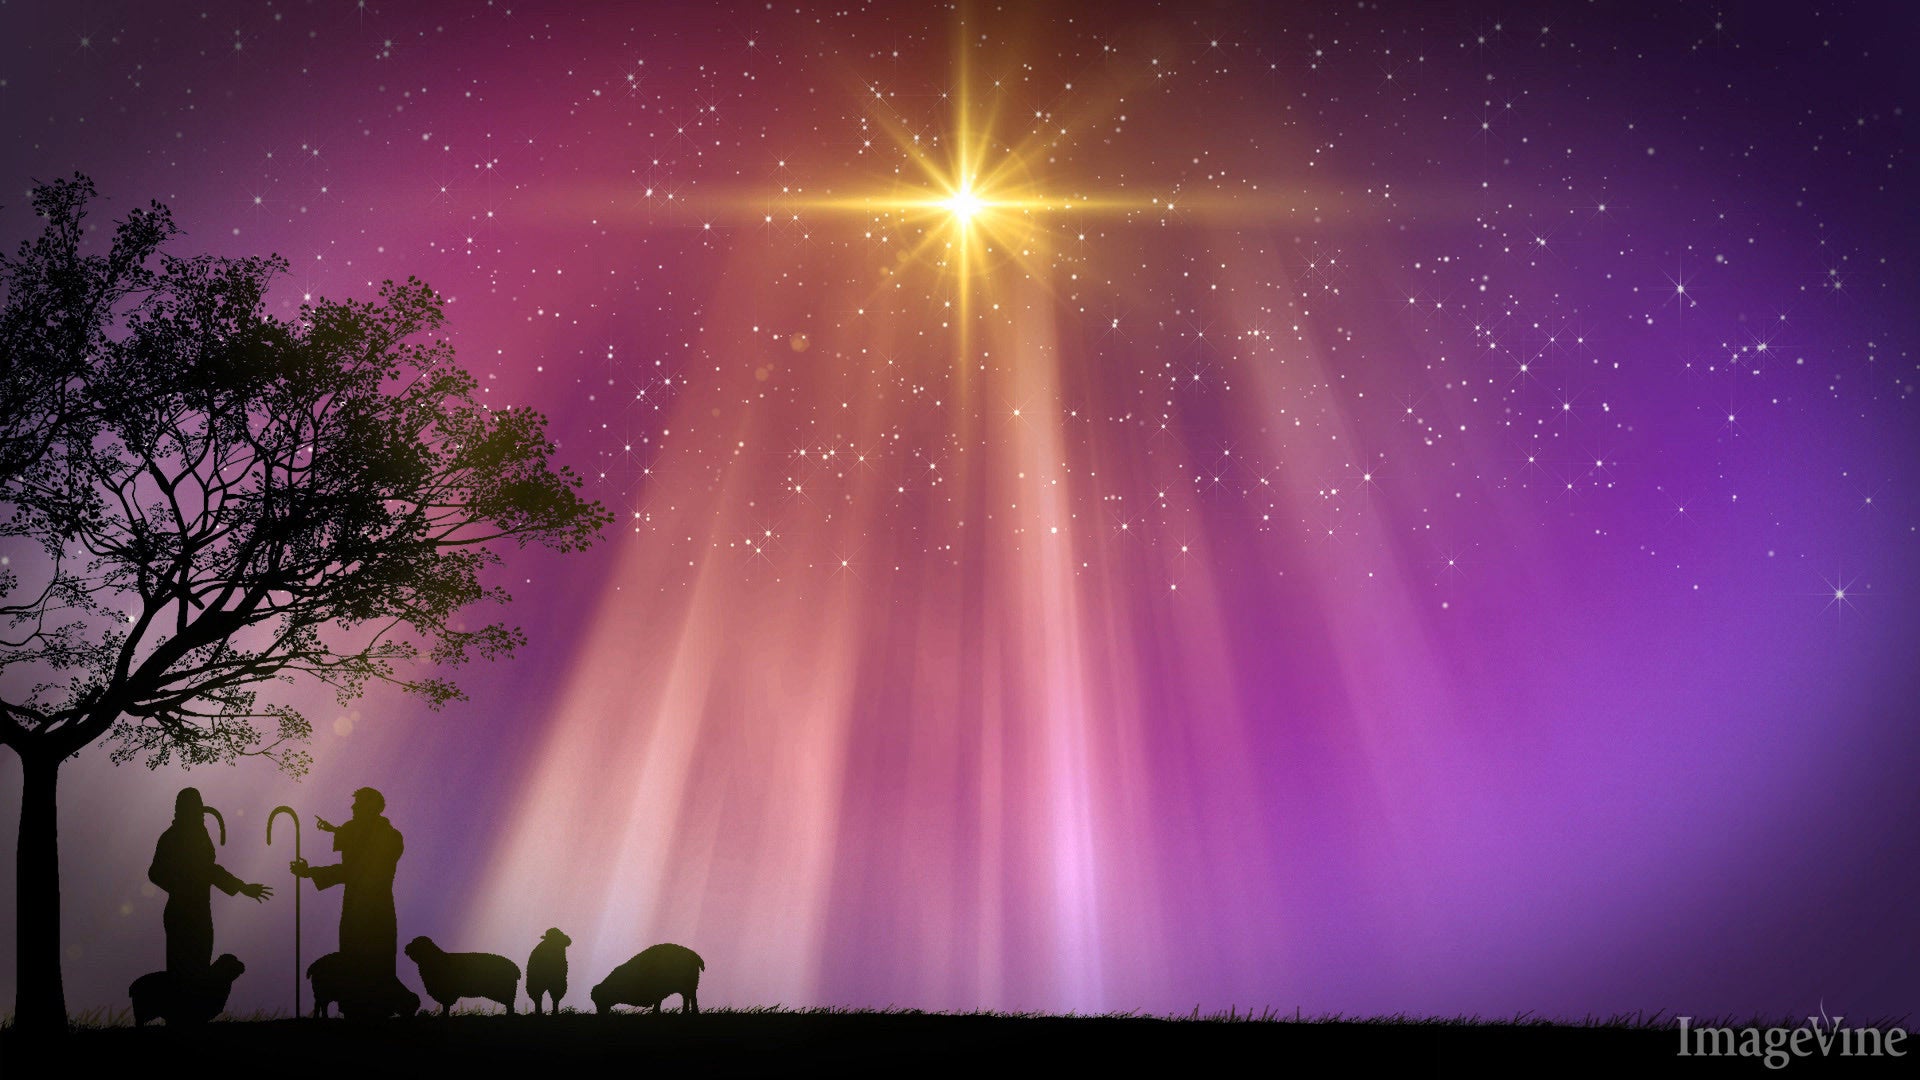 Christian Christmas Backgrounds, Images and Mini Movies ImageVine